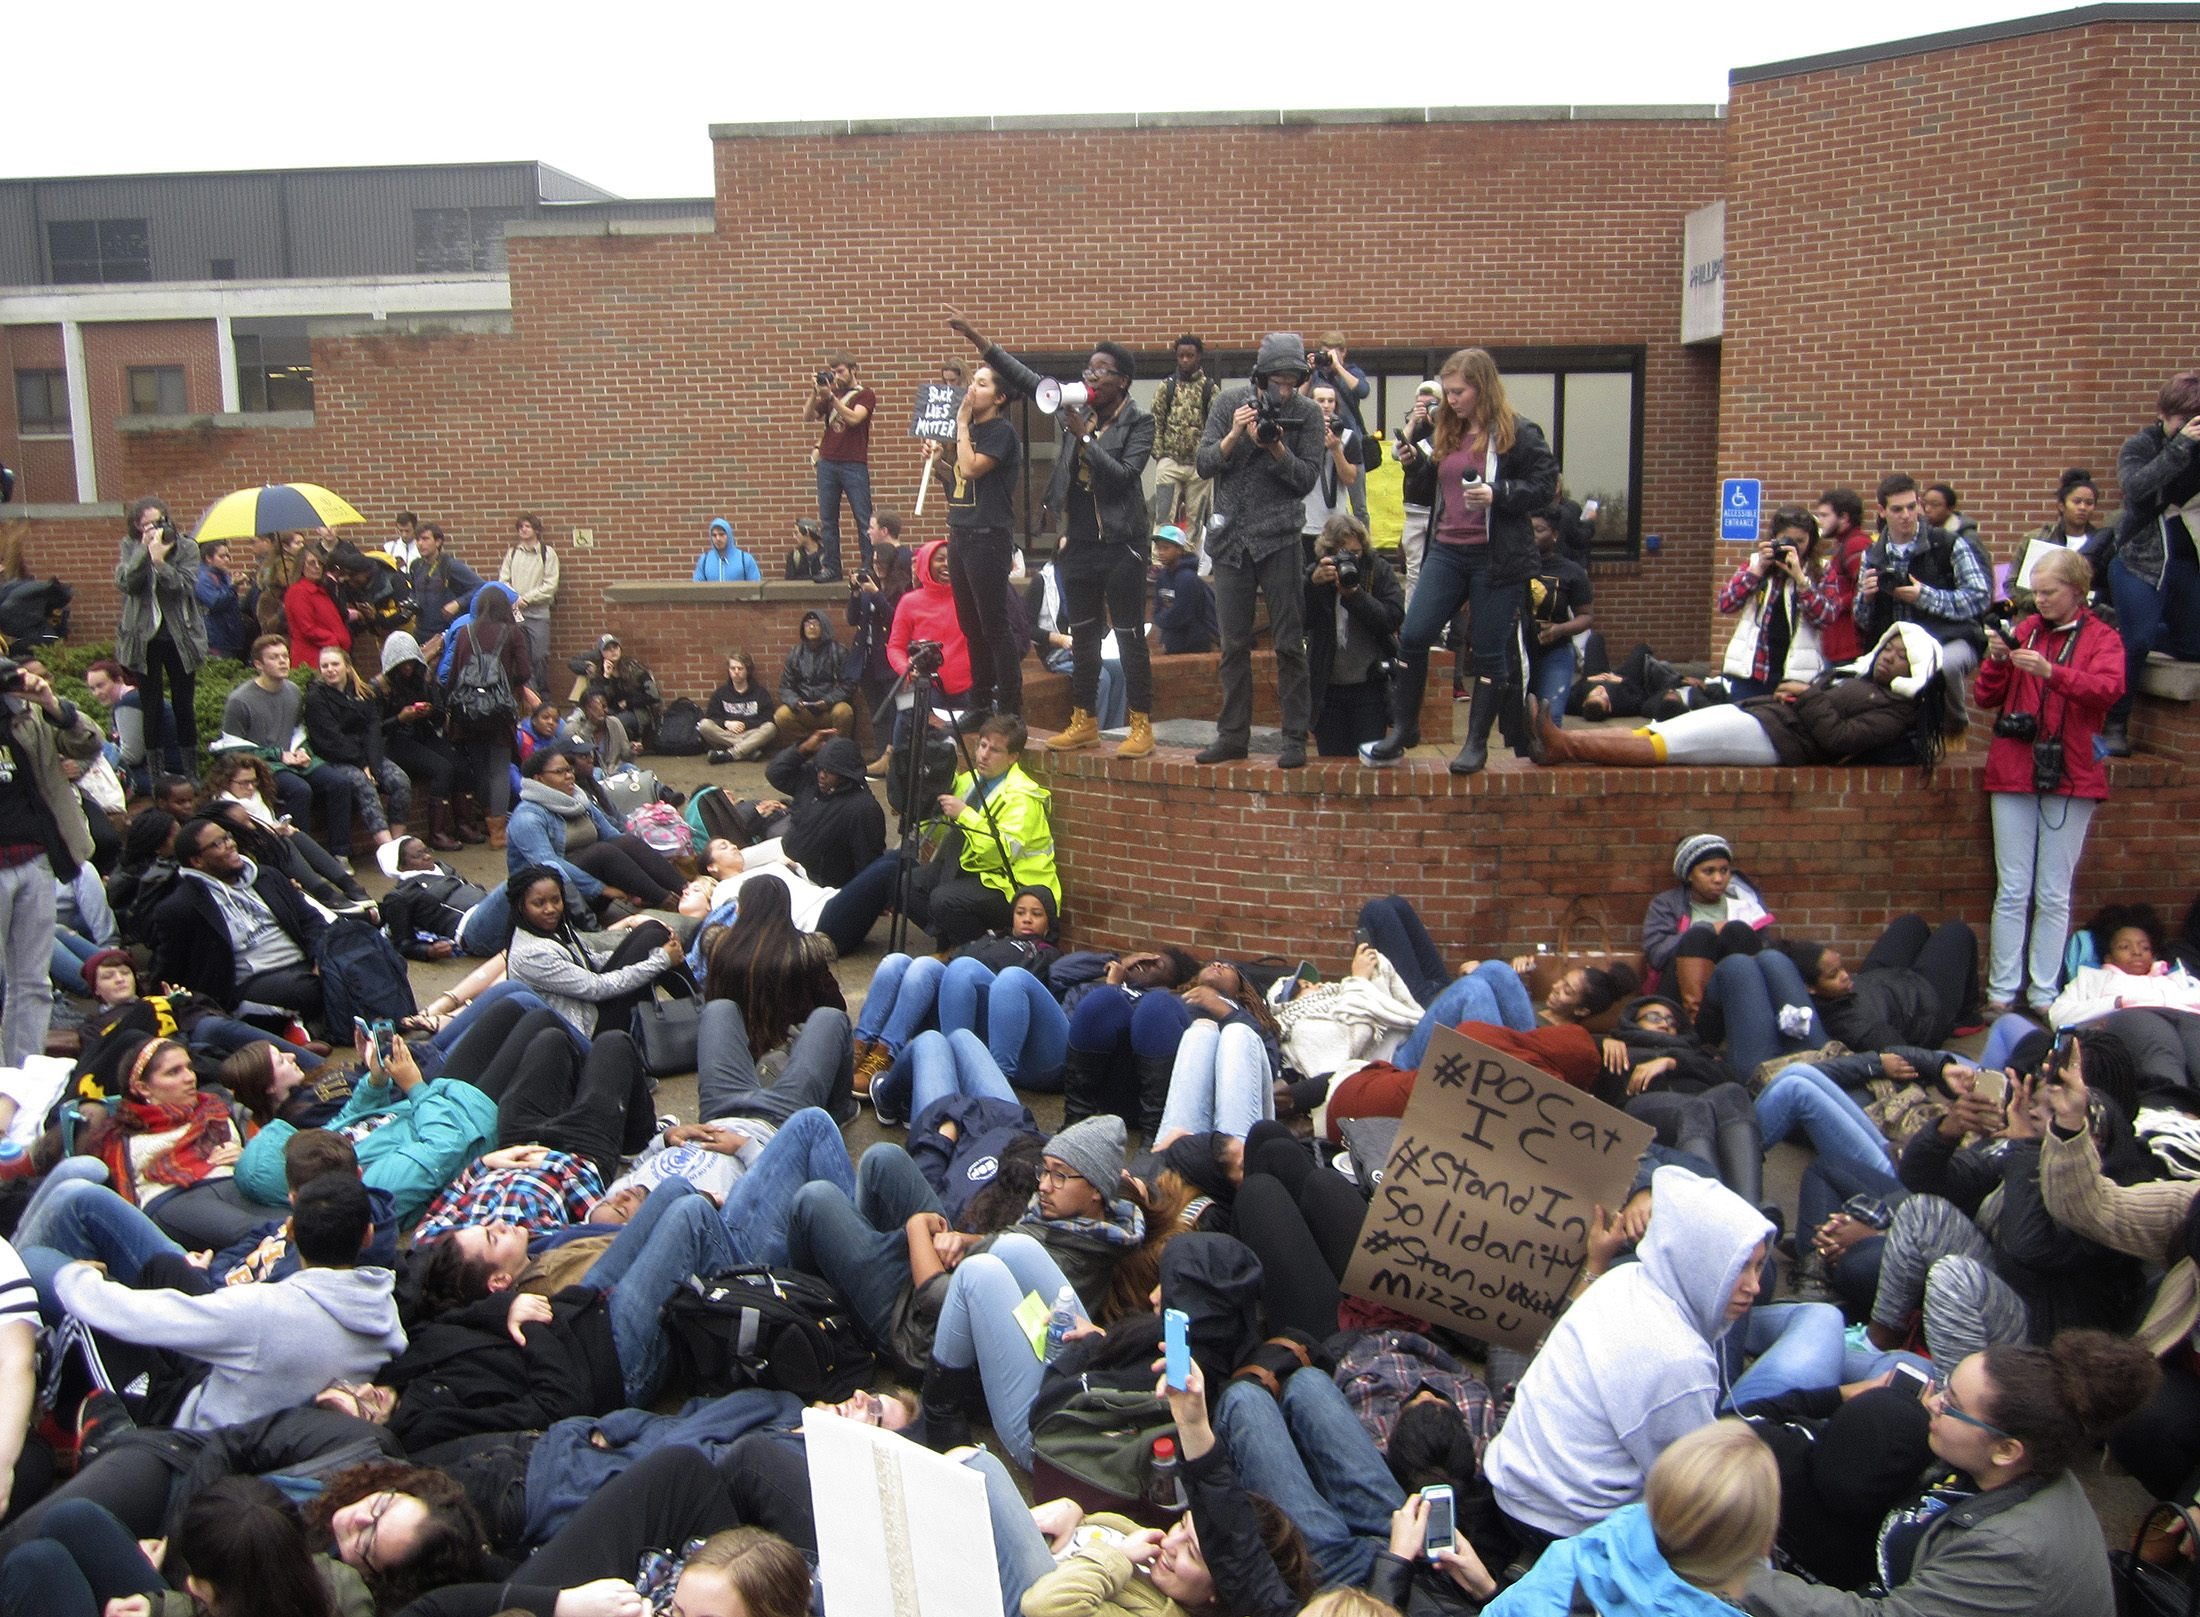 Protestorsr encourage students to lay down as part of a 'die-in' this afternoon at Ithaca College in Ithaca, New York on Nov. 11, 2015. (Matthew Liptak—Reuters)